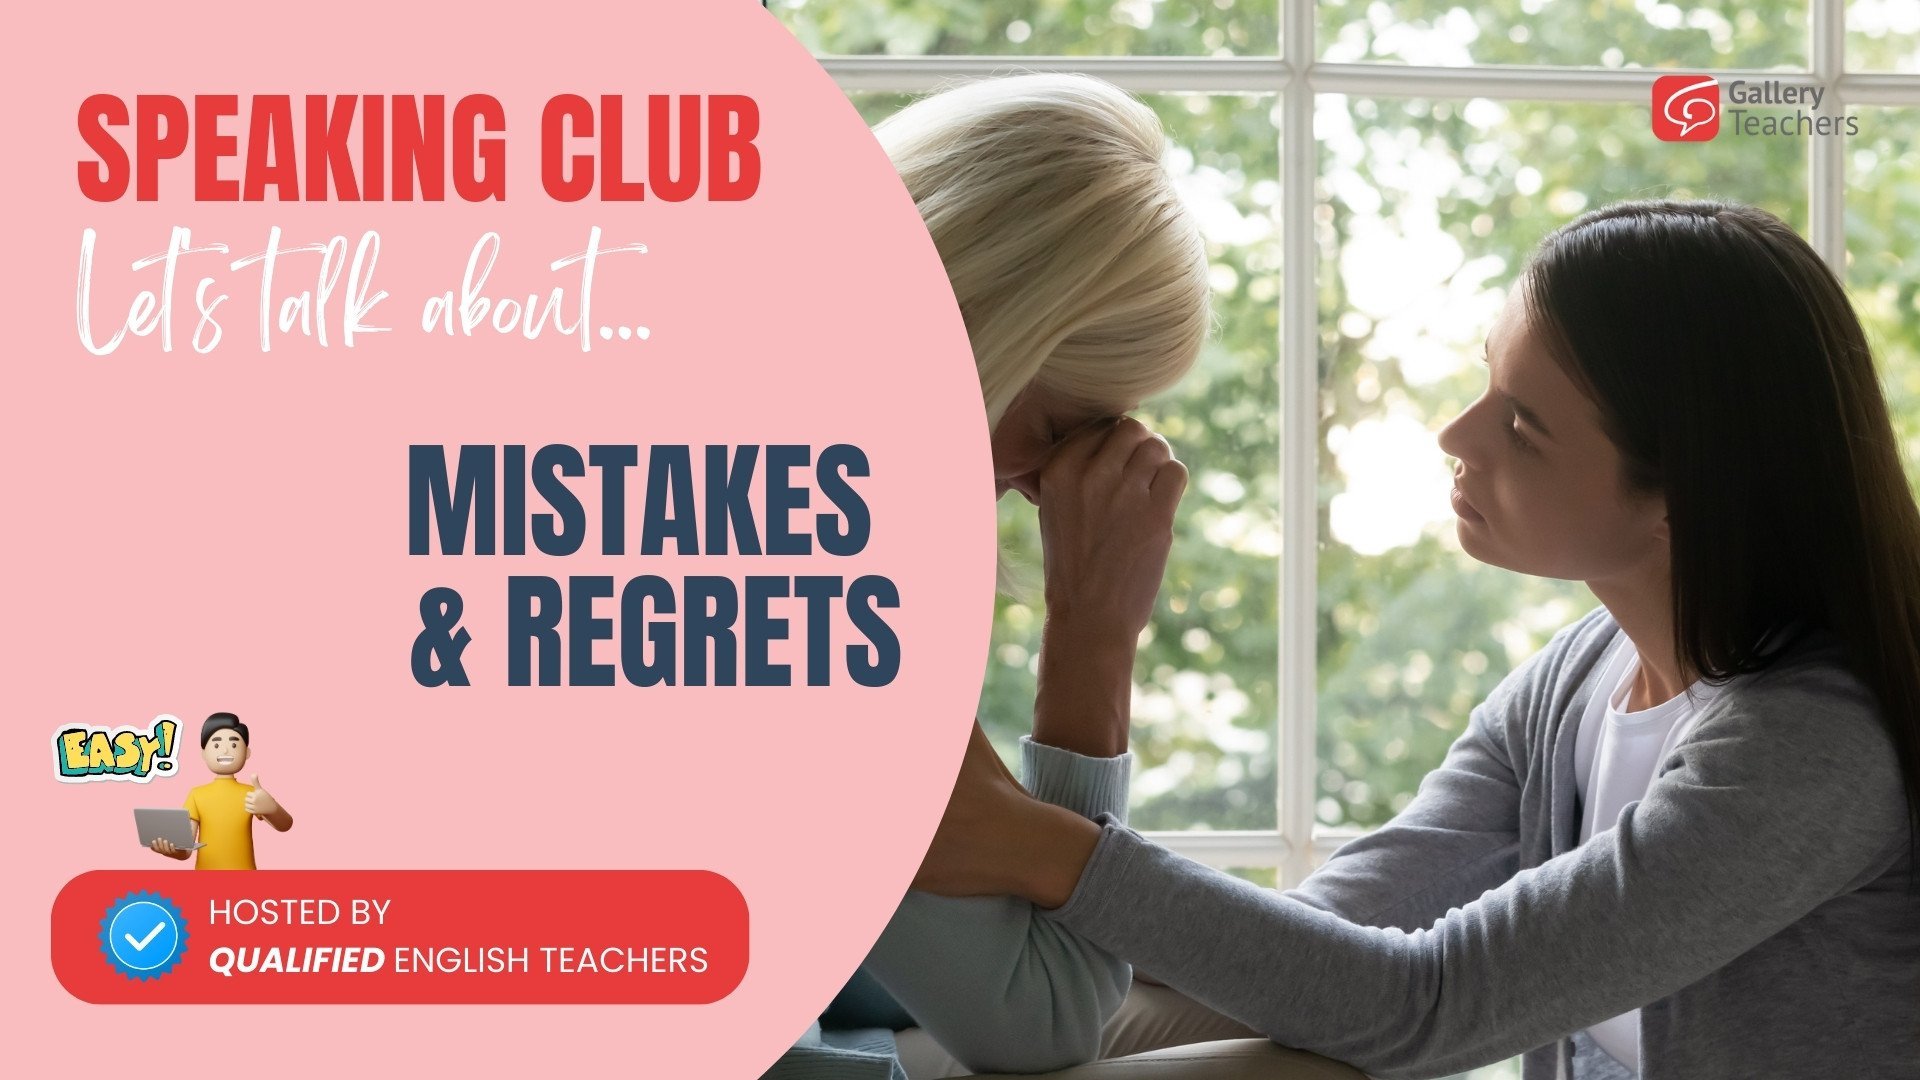 Mistakes and regrets - Gallery Teachers